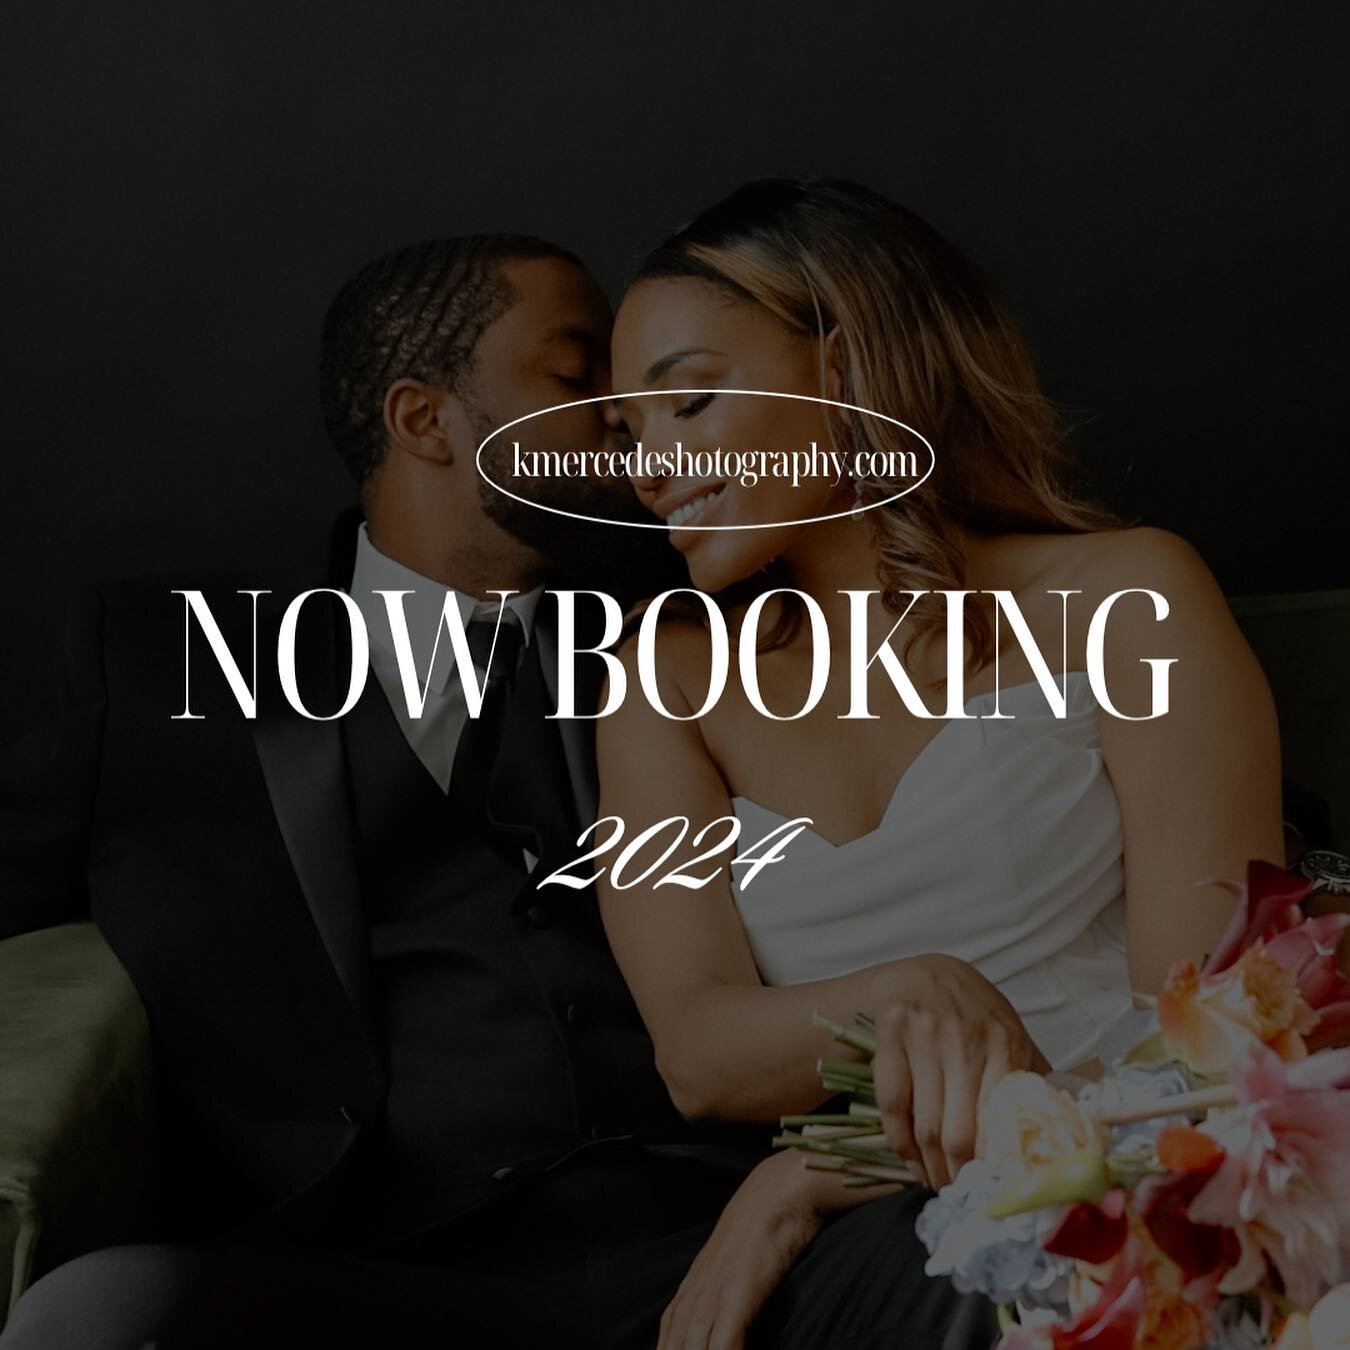 Now booking for 2024!✨

#memphisphotpgrapher 
#memphisphptography 
#memphisweddingphotographer 
#memphisportraitphotographer 
#tennesseephotographer 
#tennesseweddingphotographer 
#memphisgradphotographer 
#memphiscouplephotographer